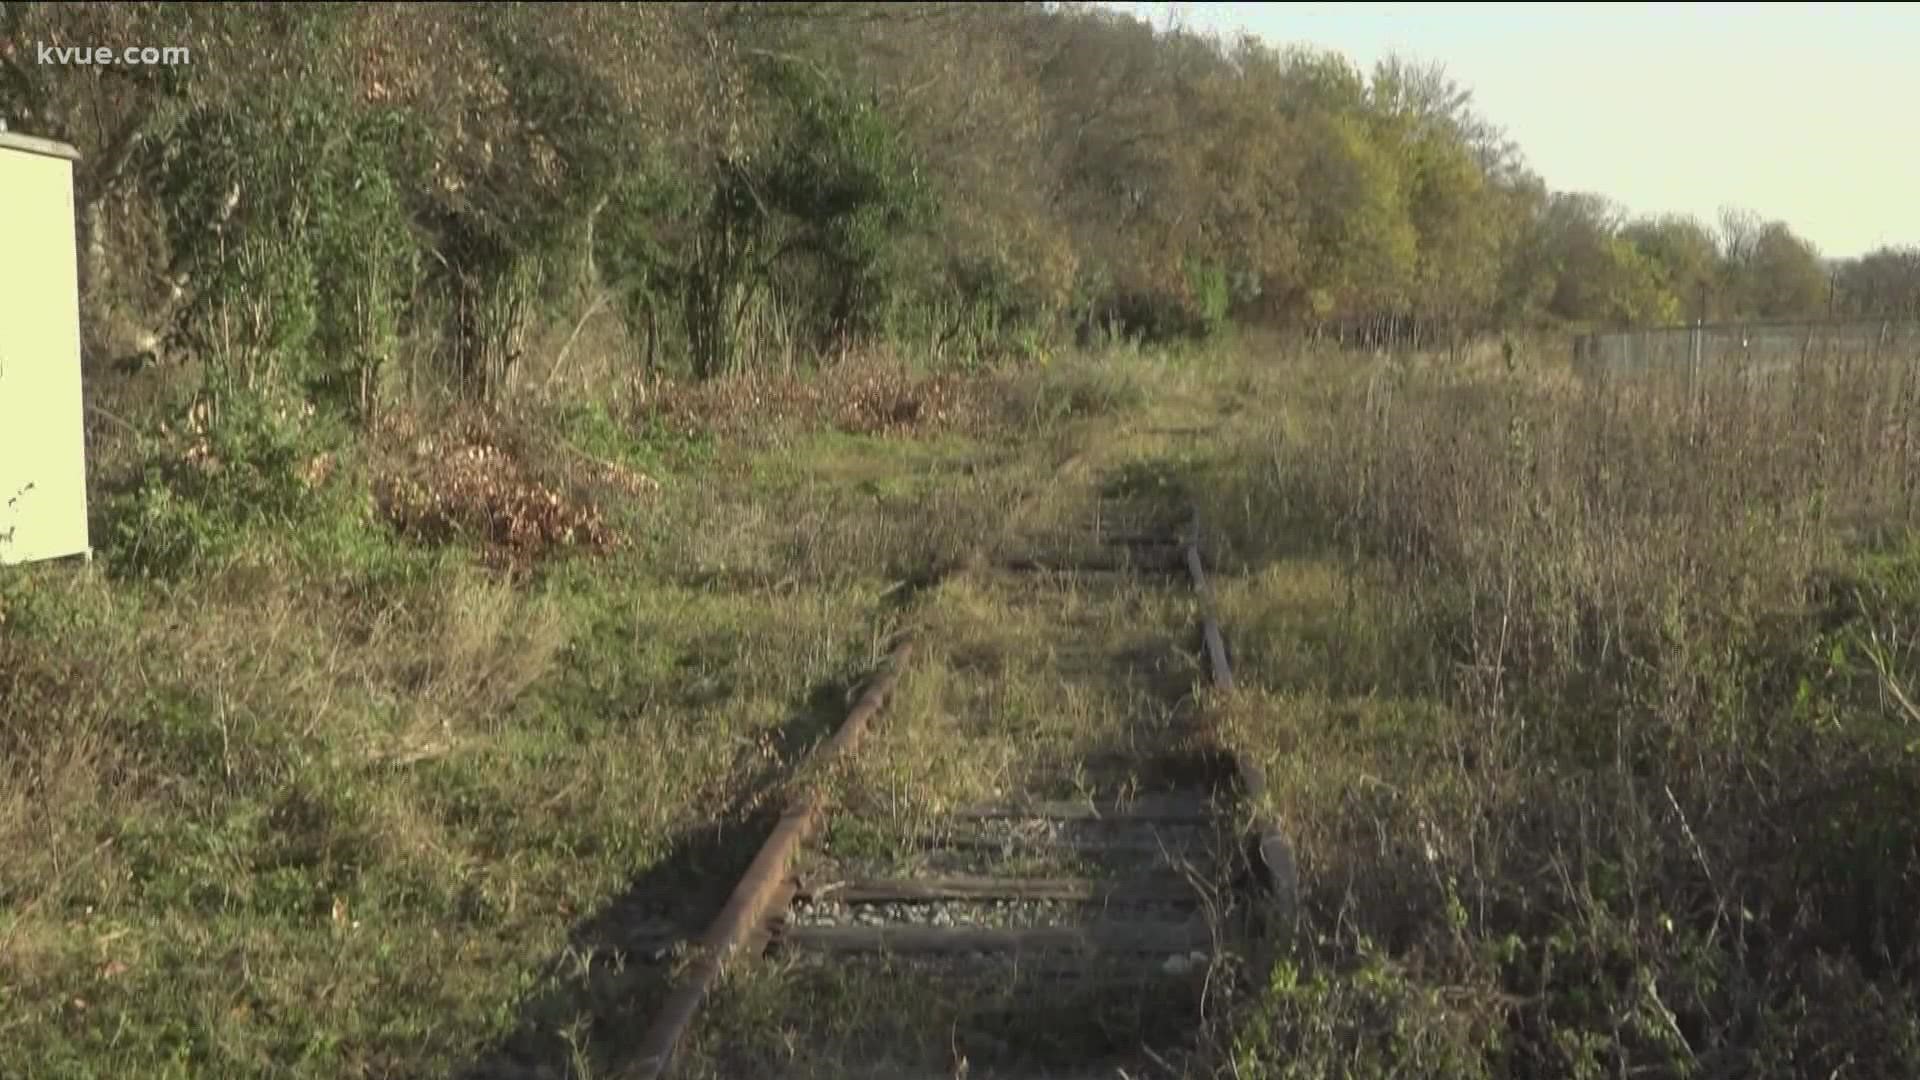 People living in southeast Austin will soon have a new place to walk, run and bike. KVUE's Conner Board tells us about Austin's first "rails-to-trails" project.